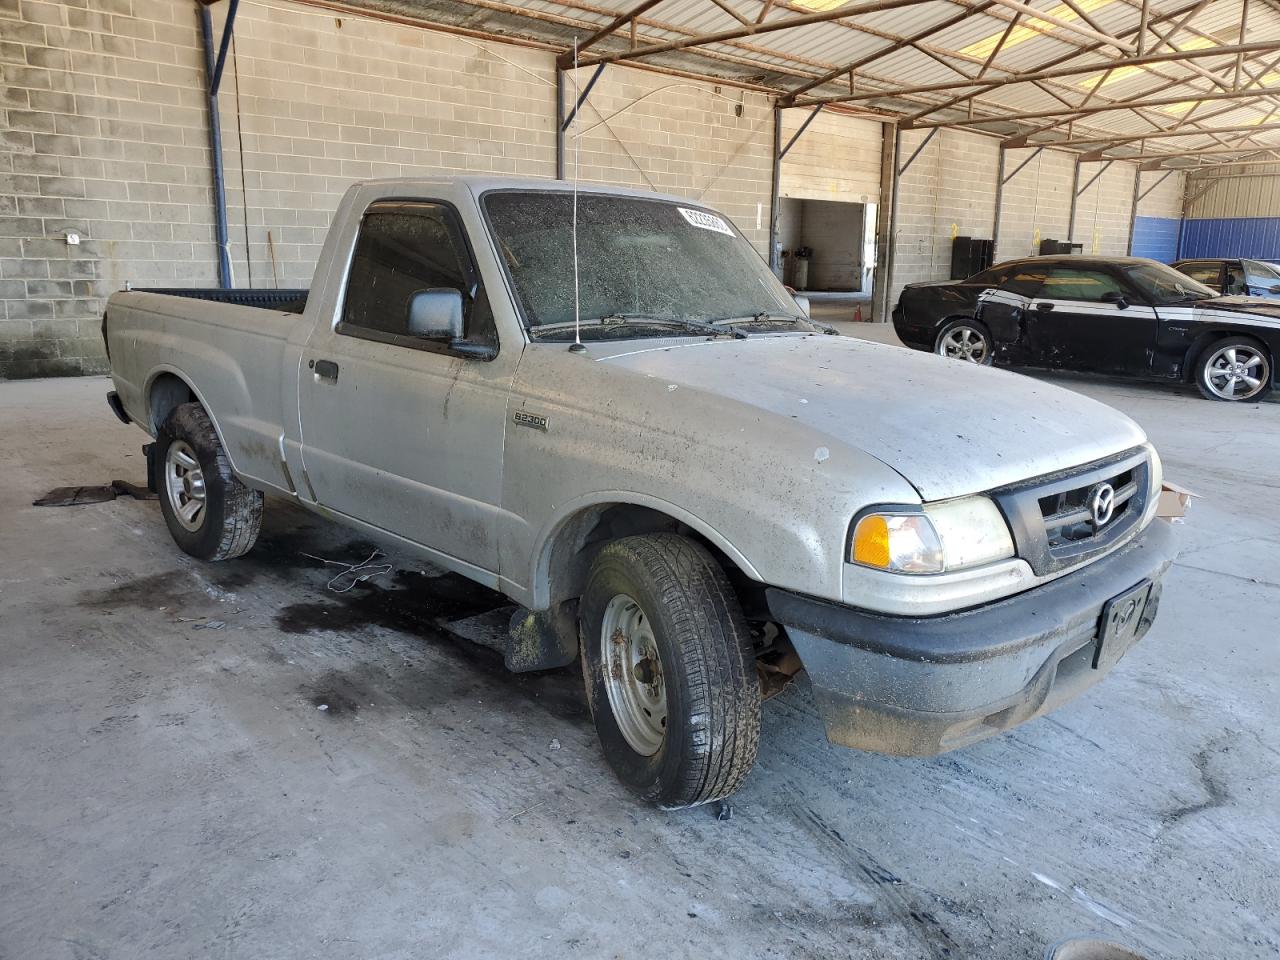 2003 Mazda B2300 for sale at Copart Cartersville, GA. Lot #62235*** |  SalvageAutosAuction.com